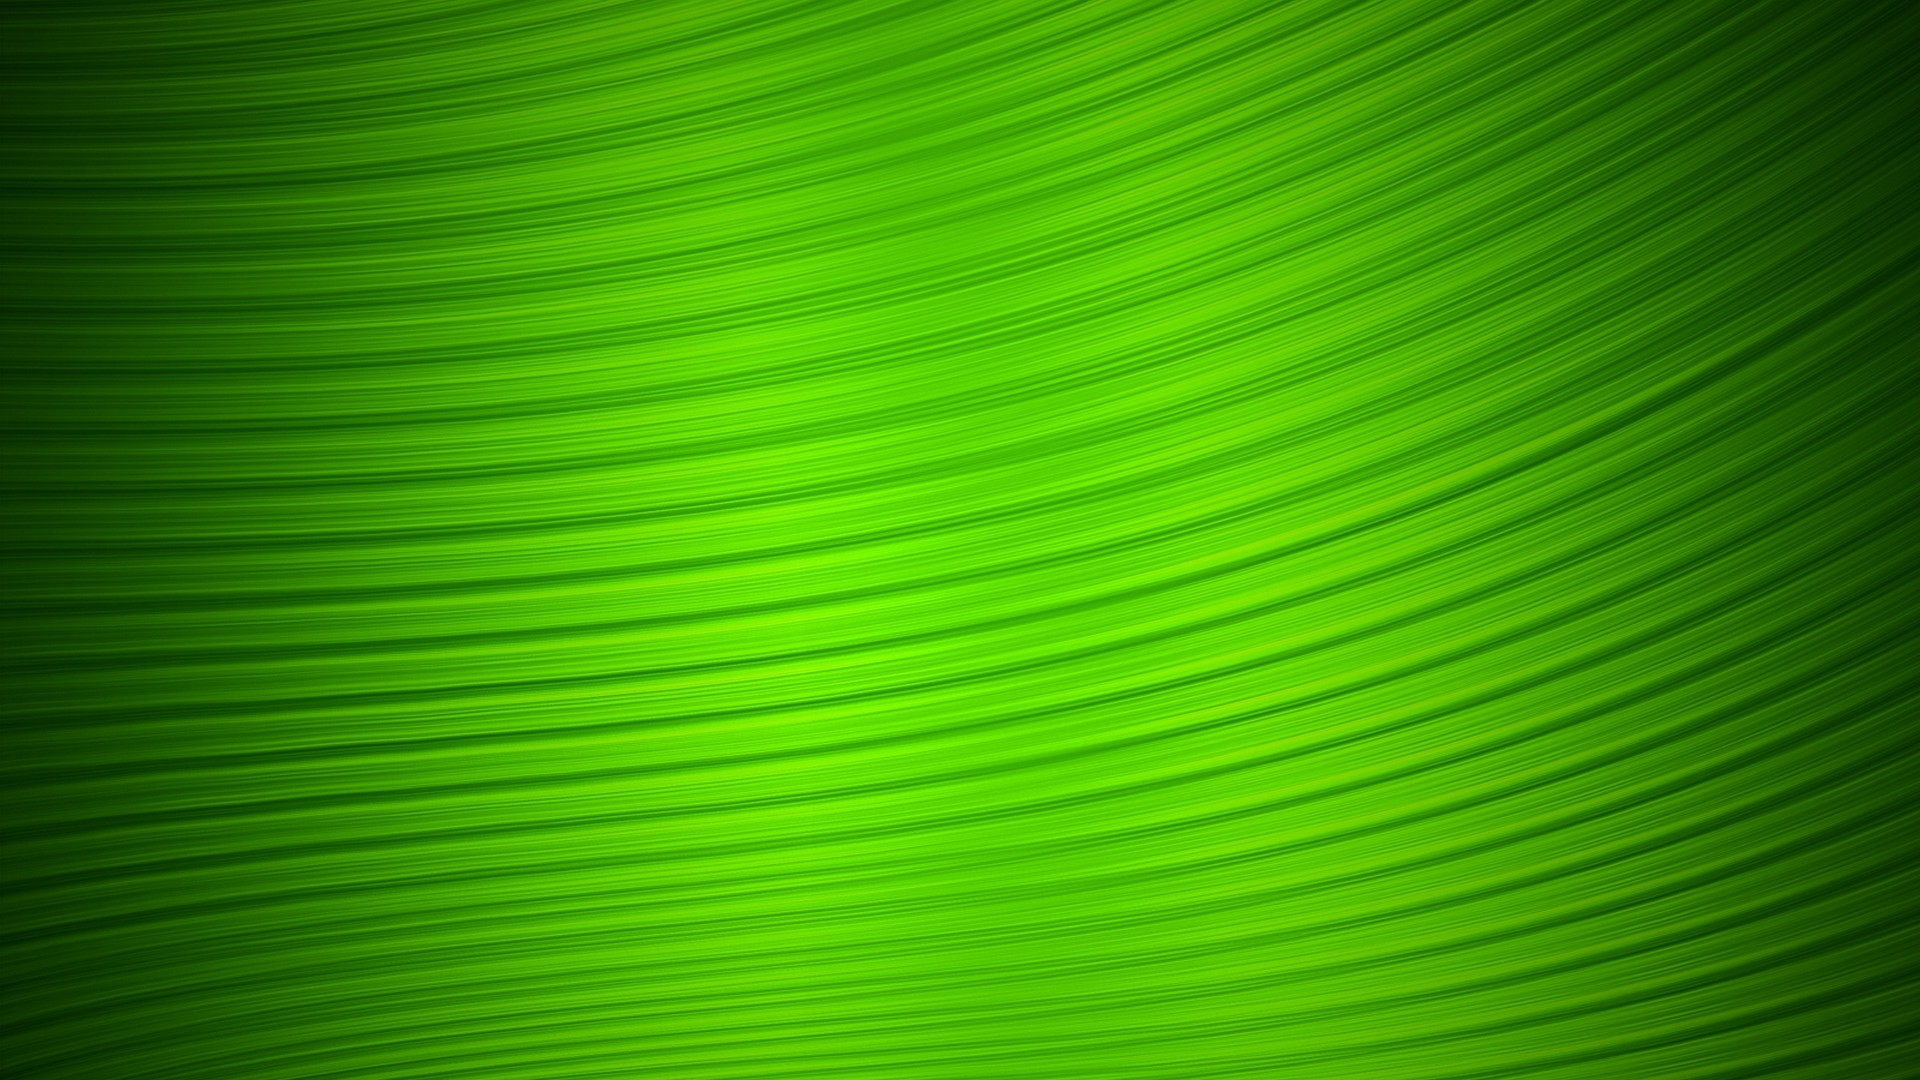 Best Green Colour Wallpaper HD With Resolution 1920X1080 pixel. You can make this wallpaper for your Desktop Computer Backgrounds, Mac Wallpapers, Android Lock screen or iPhone Screensavers